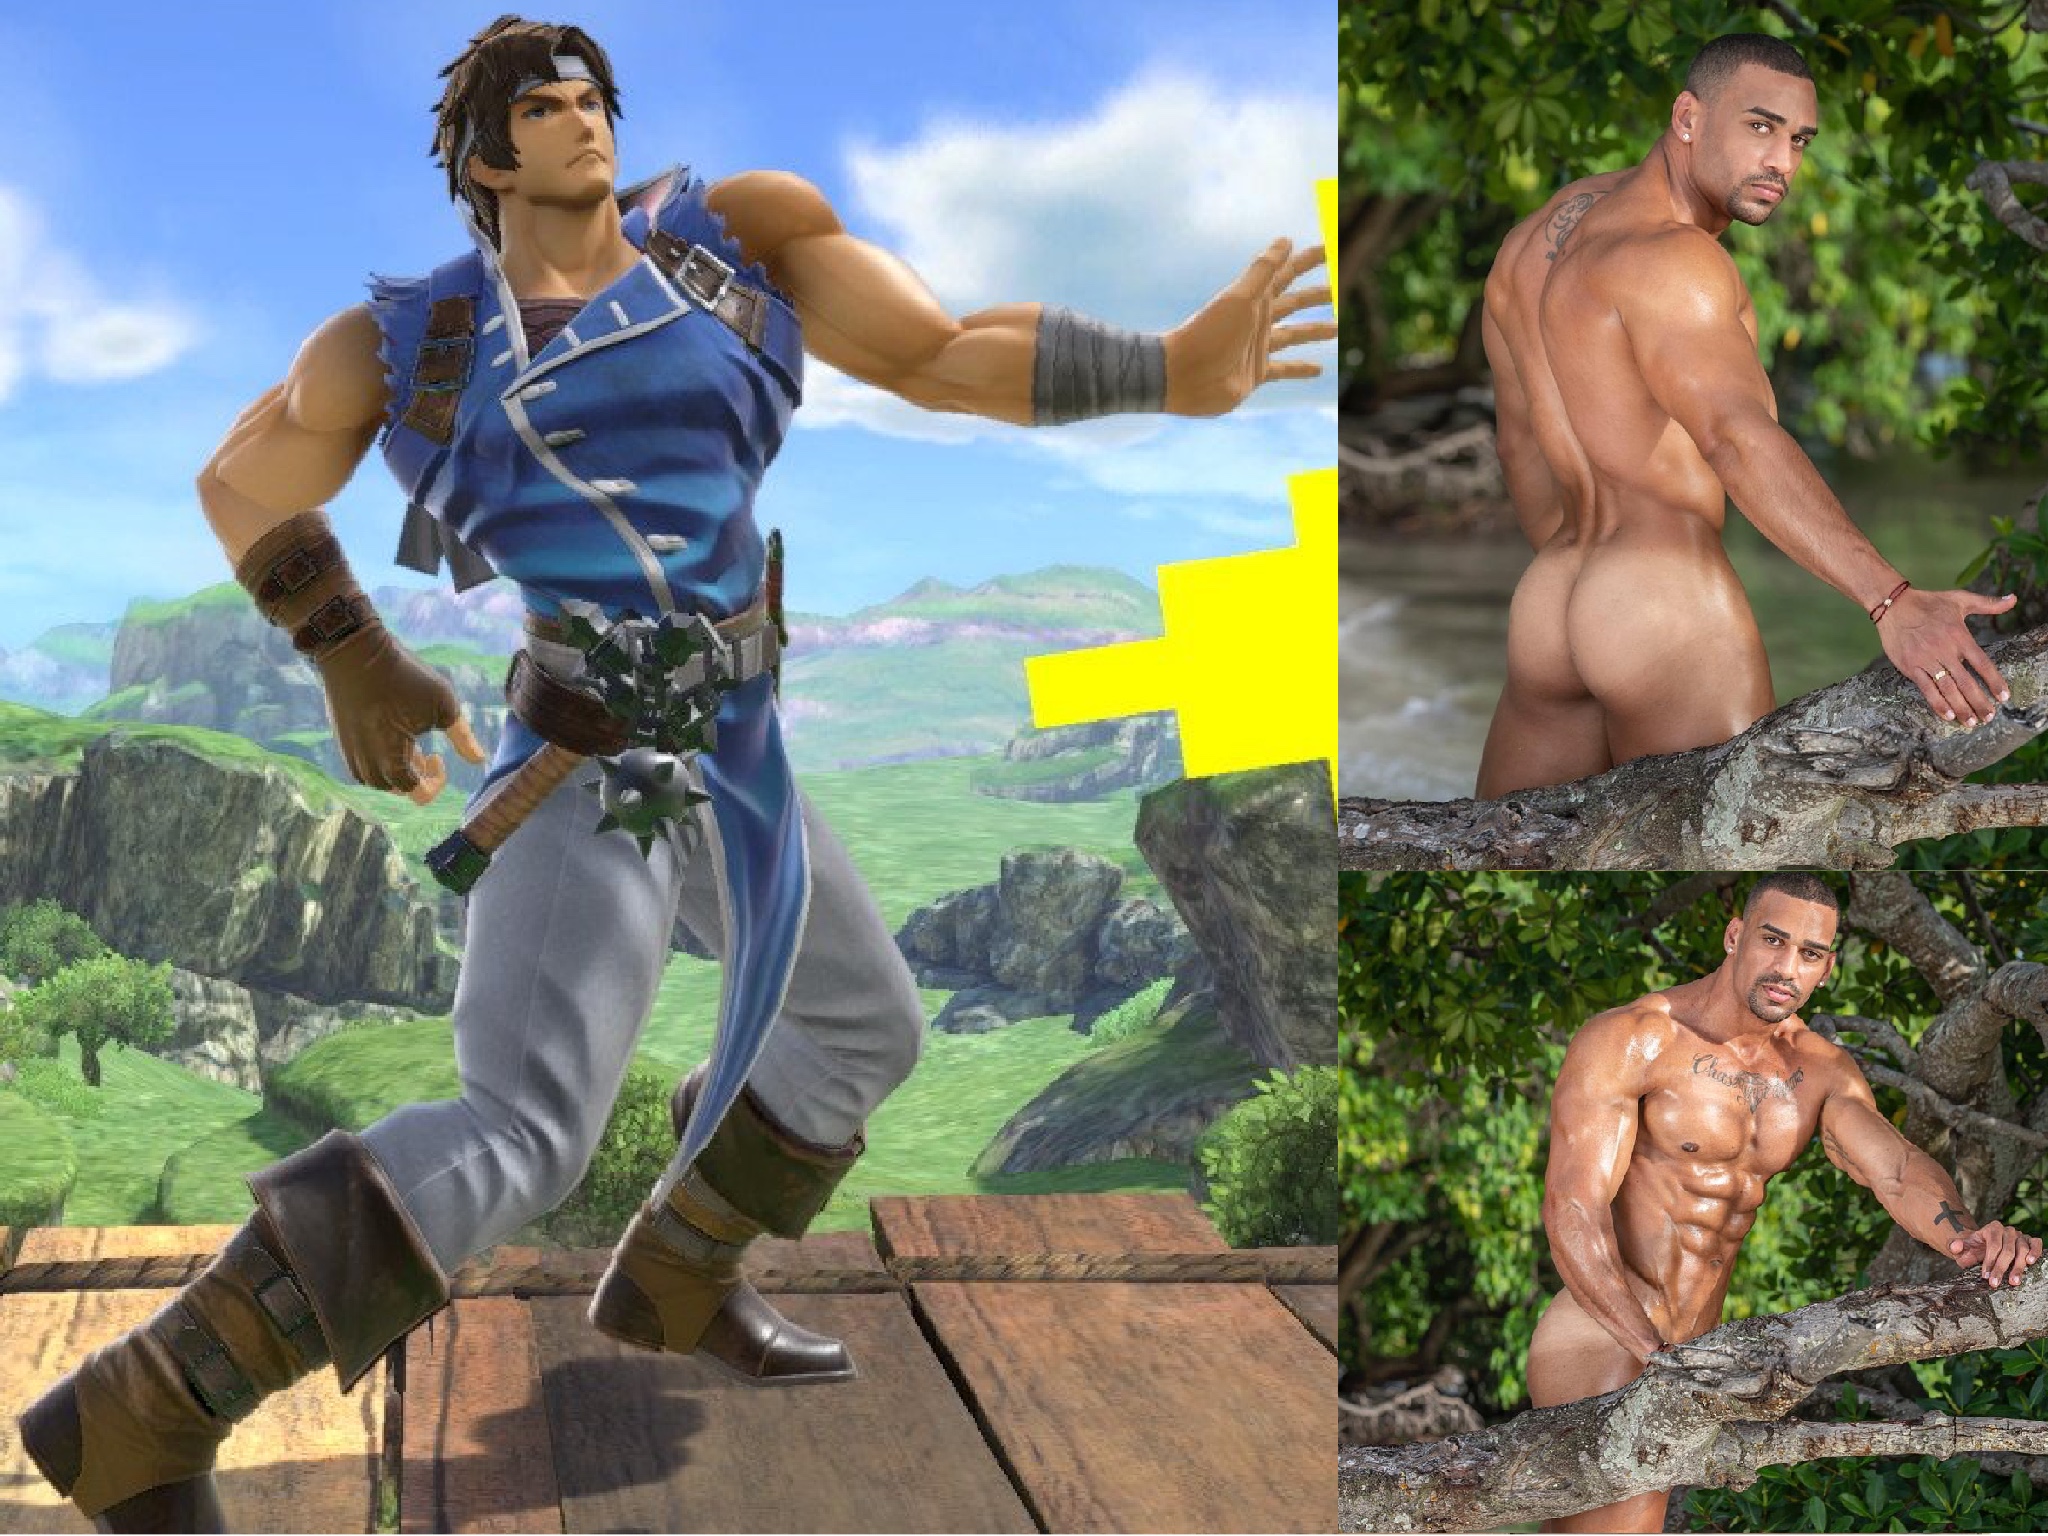 Requesting Richter Belmont trying to find his clothes after taking a bath a...